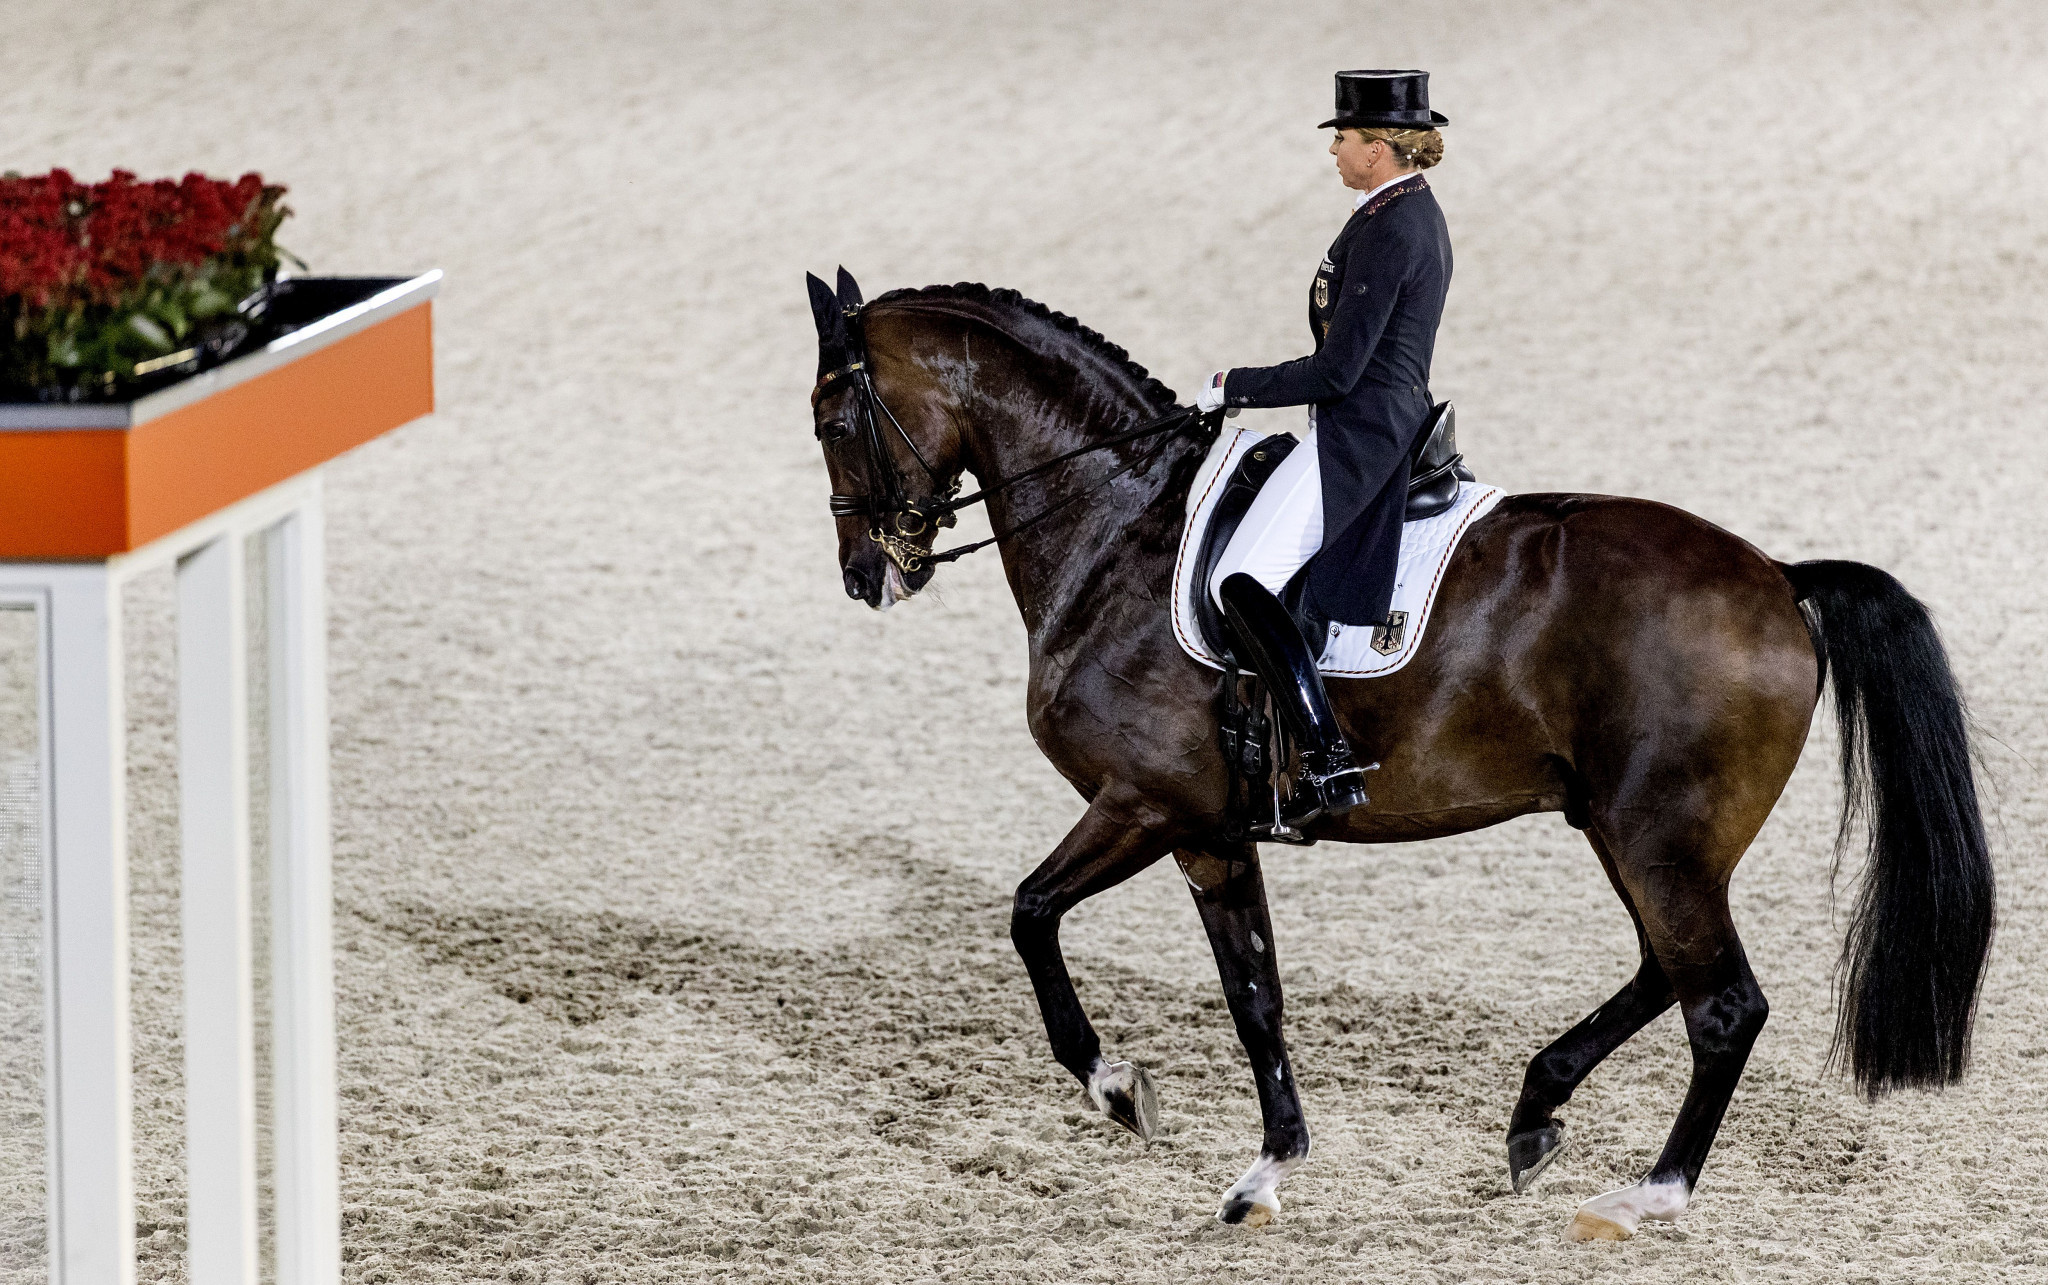 Hagen has been named as host of the 2021 European Dressage Championships ©Getty Images